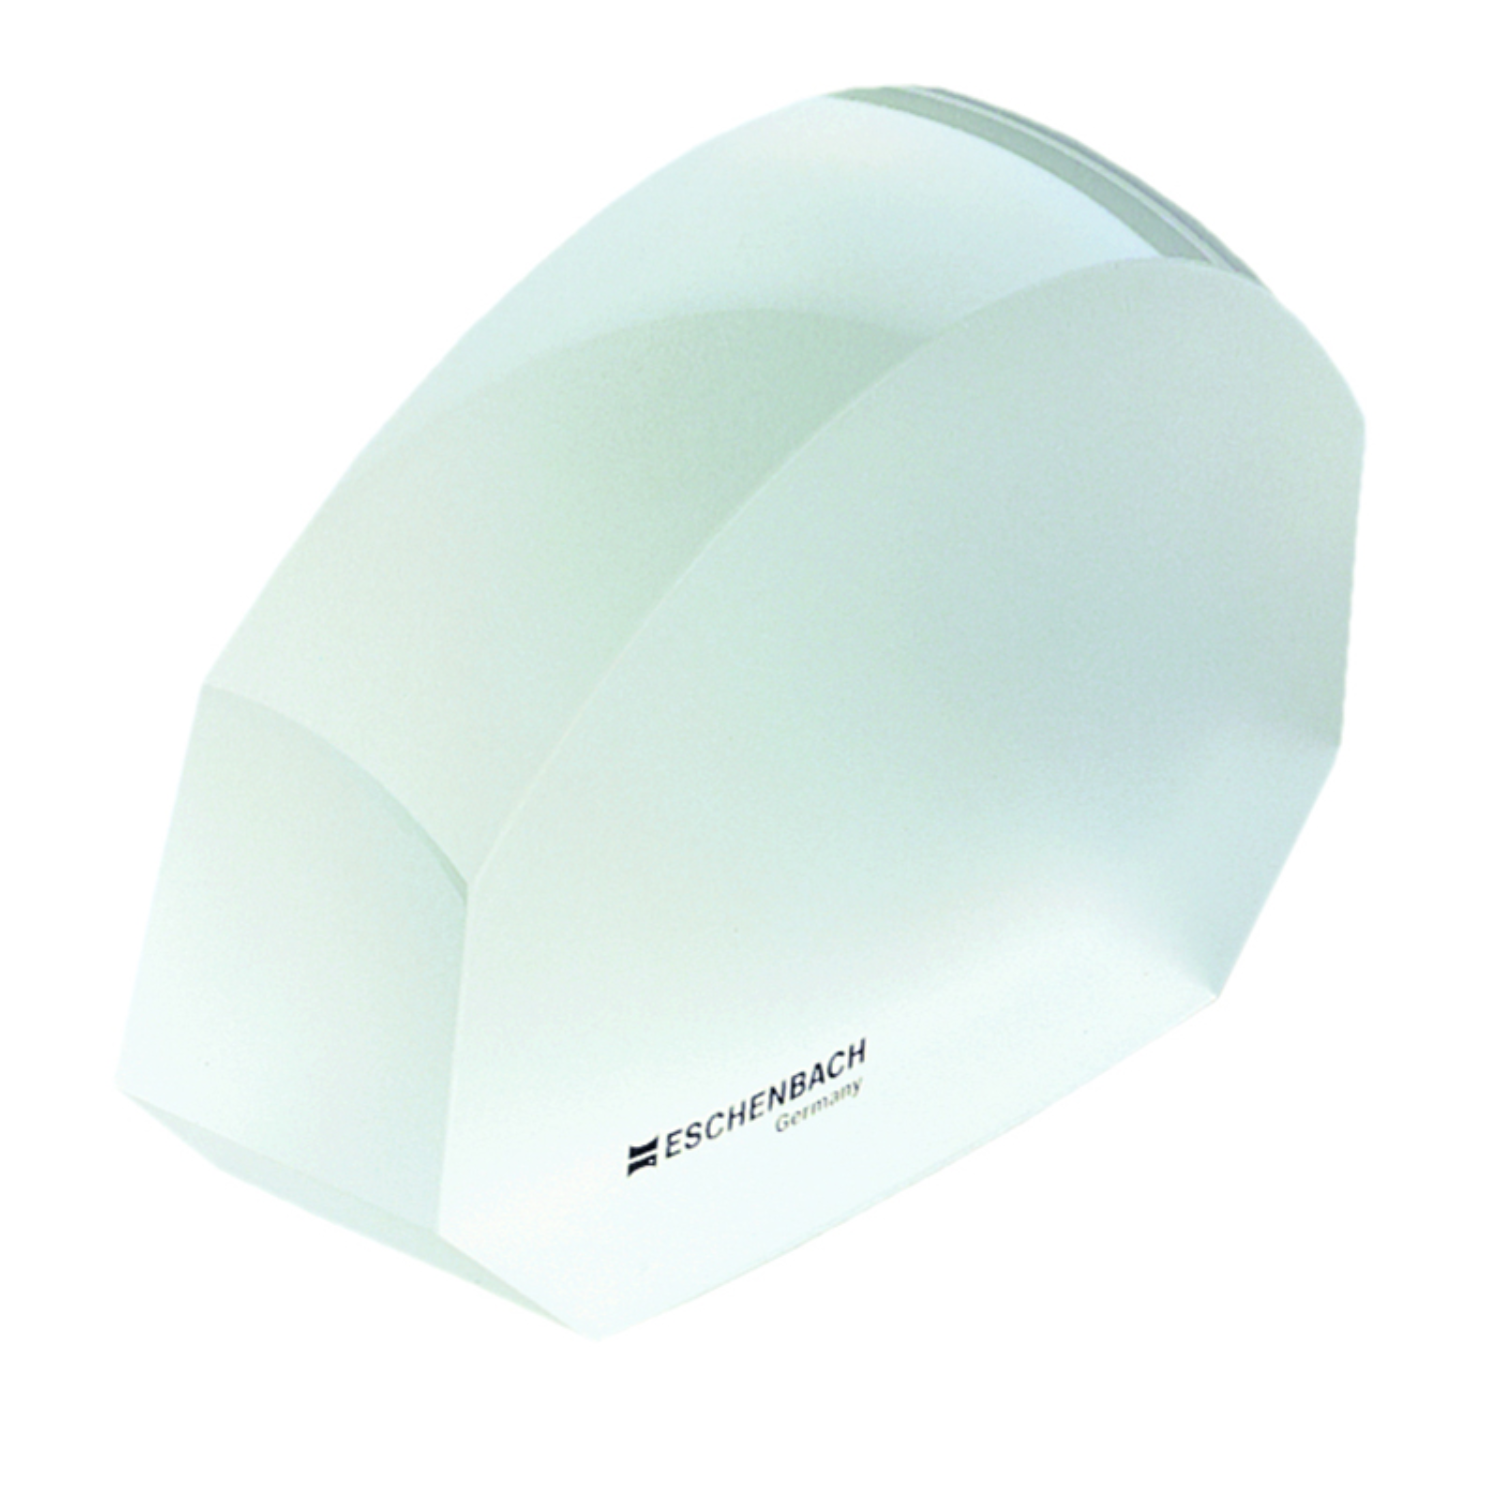 Image of the MakroPLUS Bright Field 2.2x Dome Magnifier from Eschenbach.